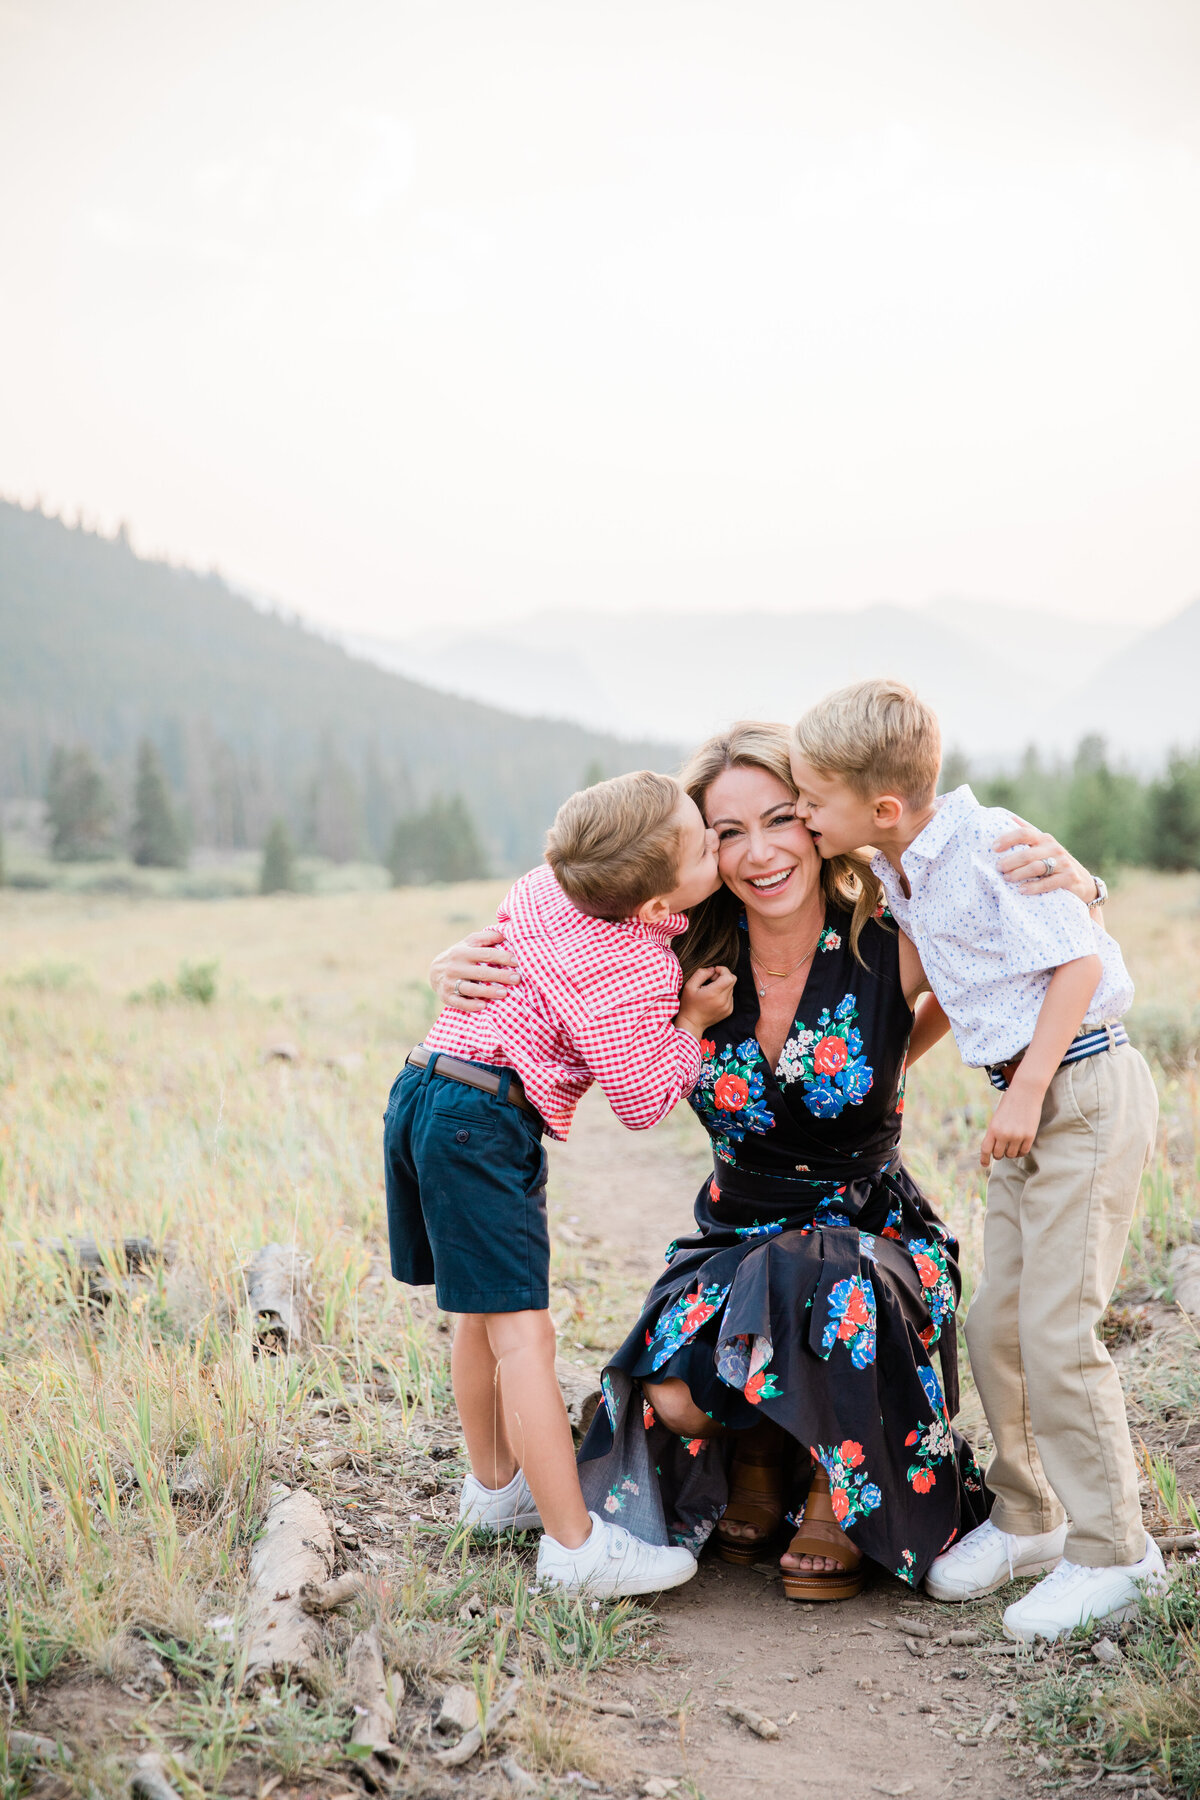 A mom of two boys kneels down to their level to embrace in a hug